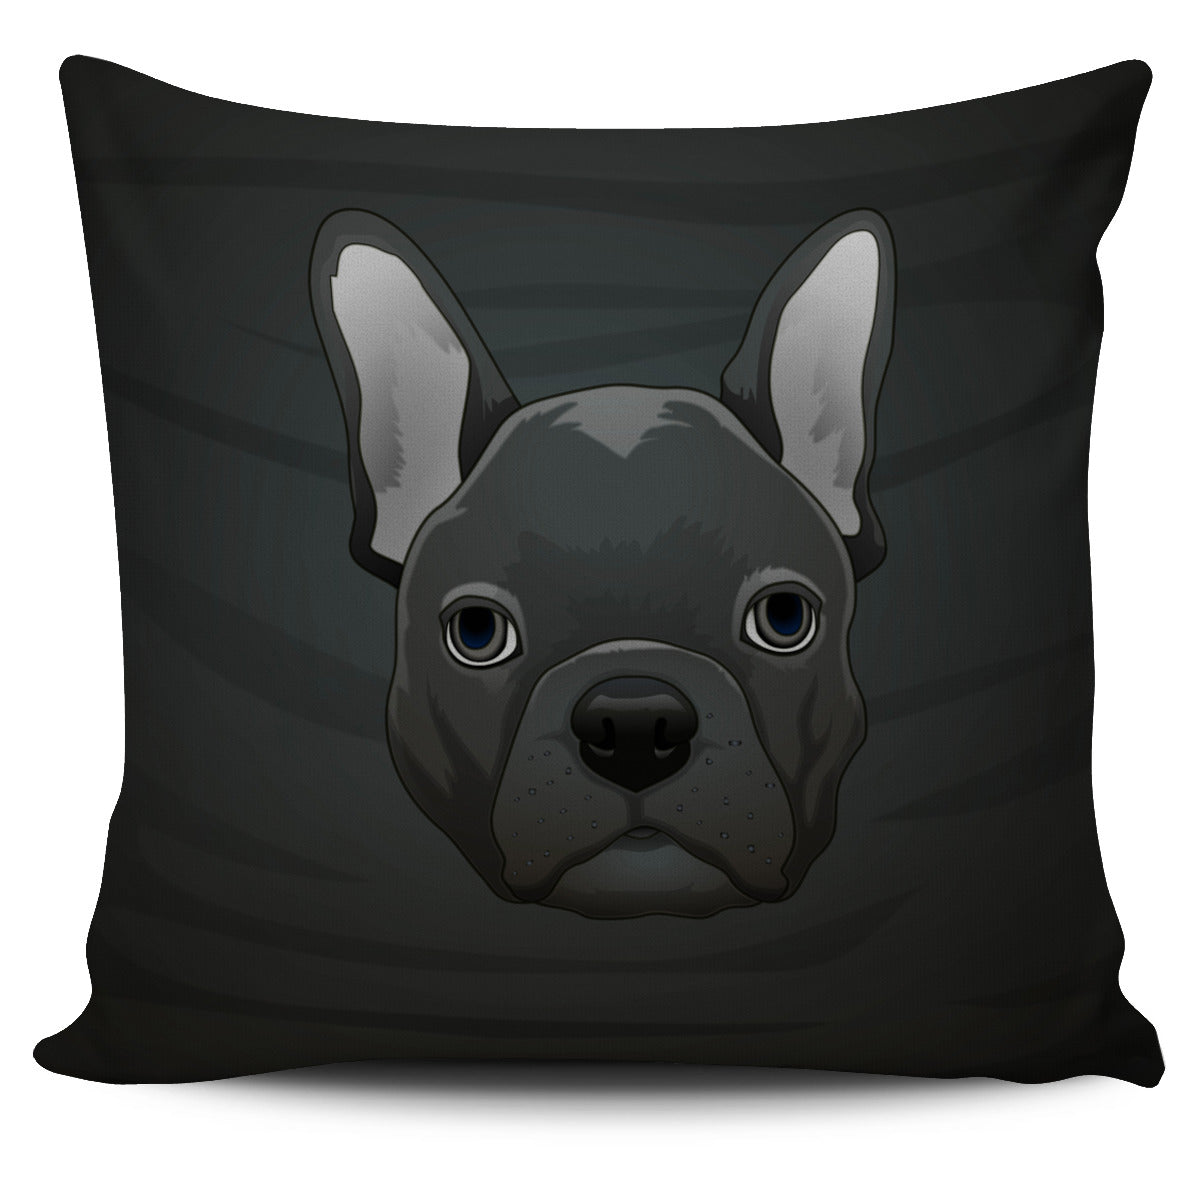 Real French Bulldog Pillow Cover